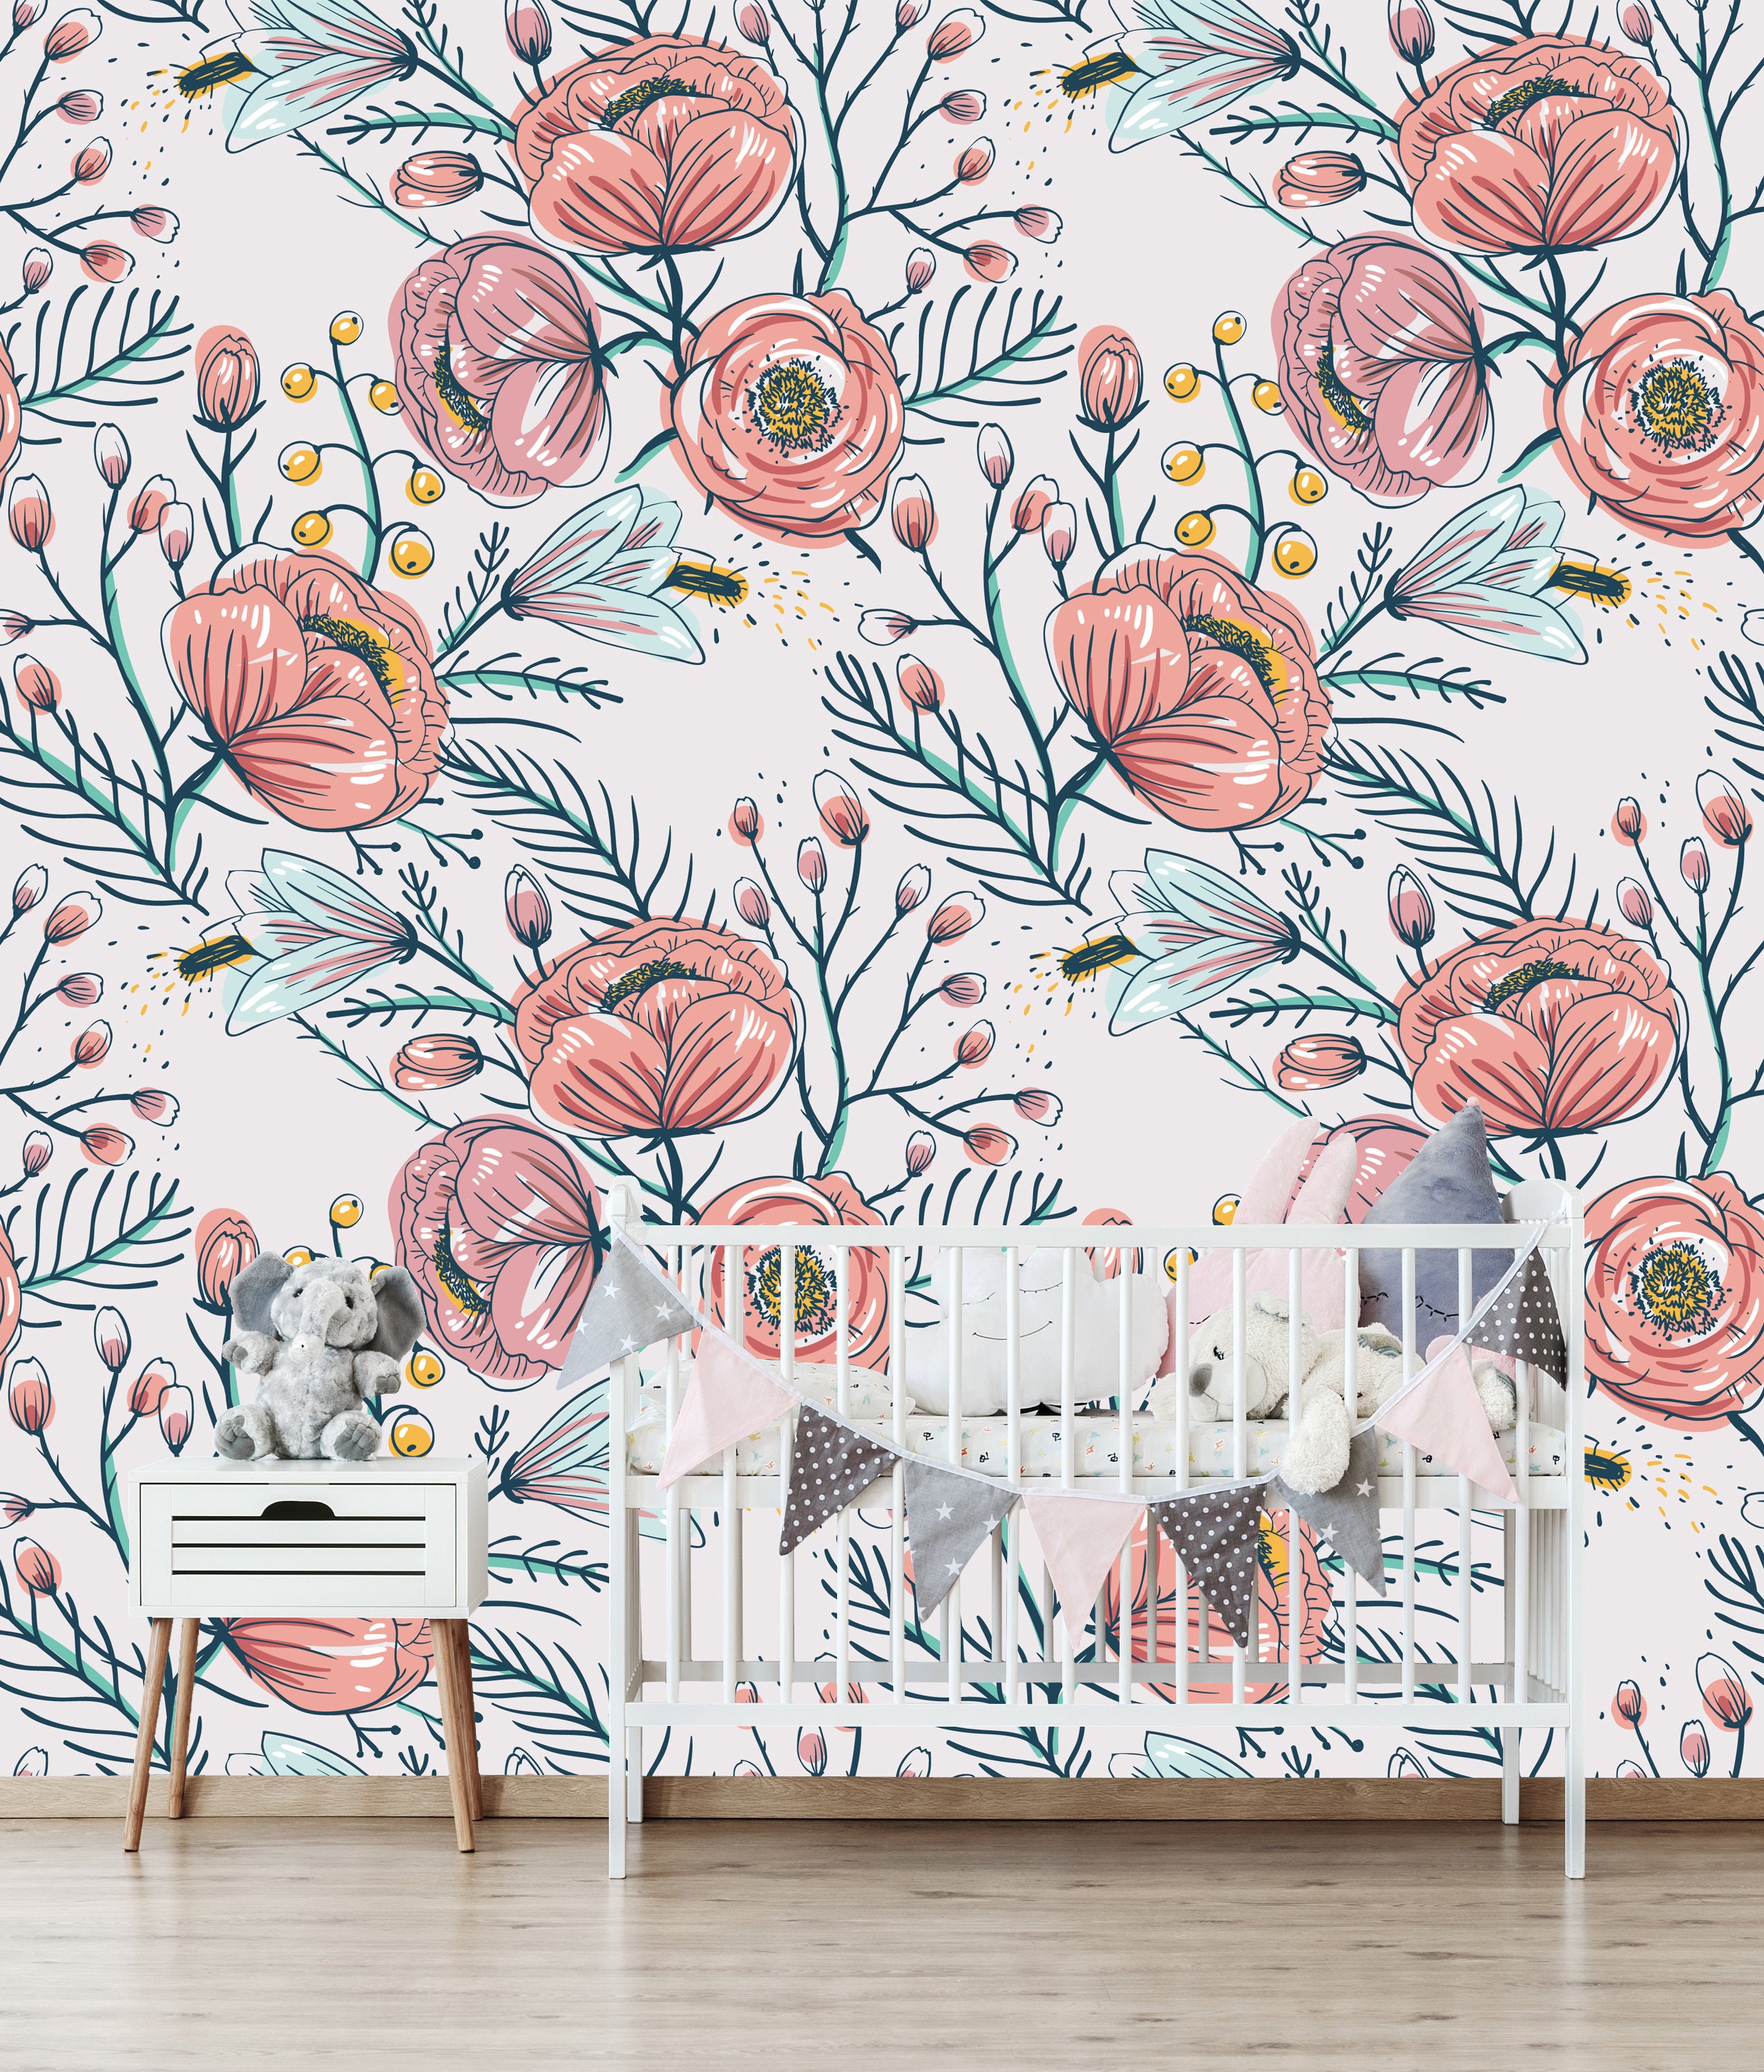 Poppy Flowers Removable Wallpaper Floral Wallpaper Anemone - Etsy